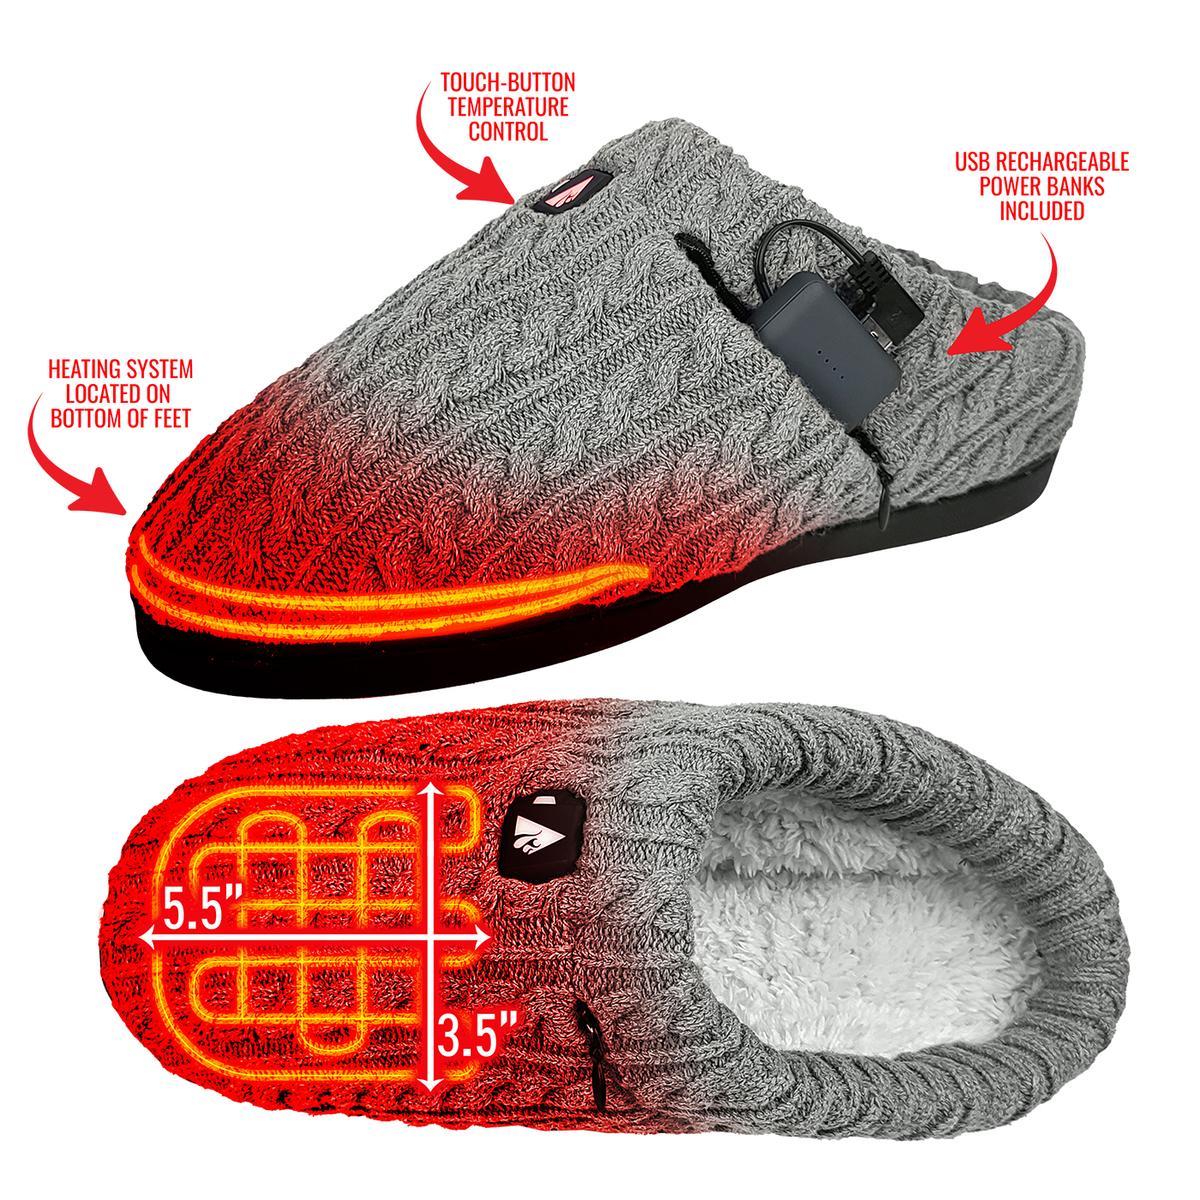 ActionHeat 5V Battery Heated Cable Knit Slippers - Back